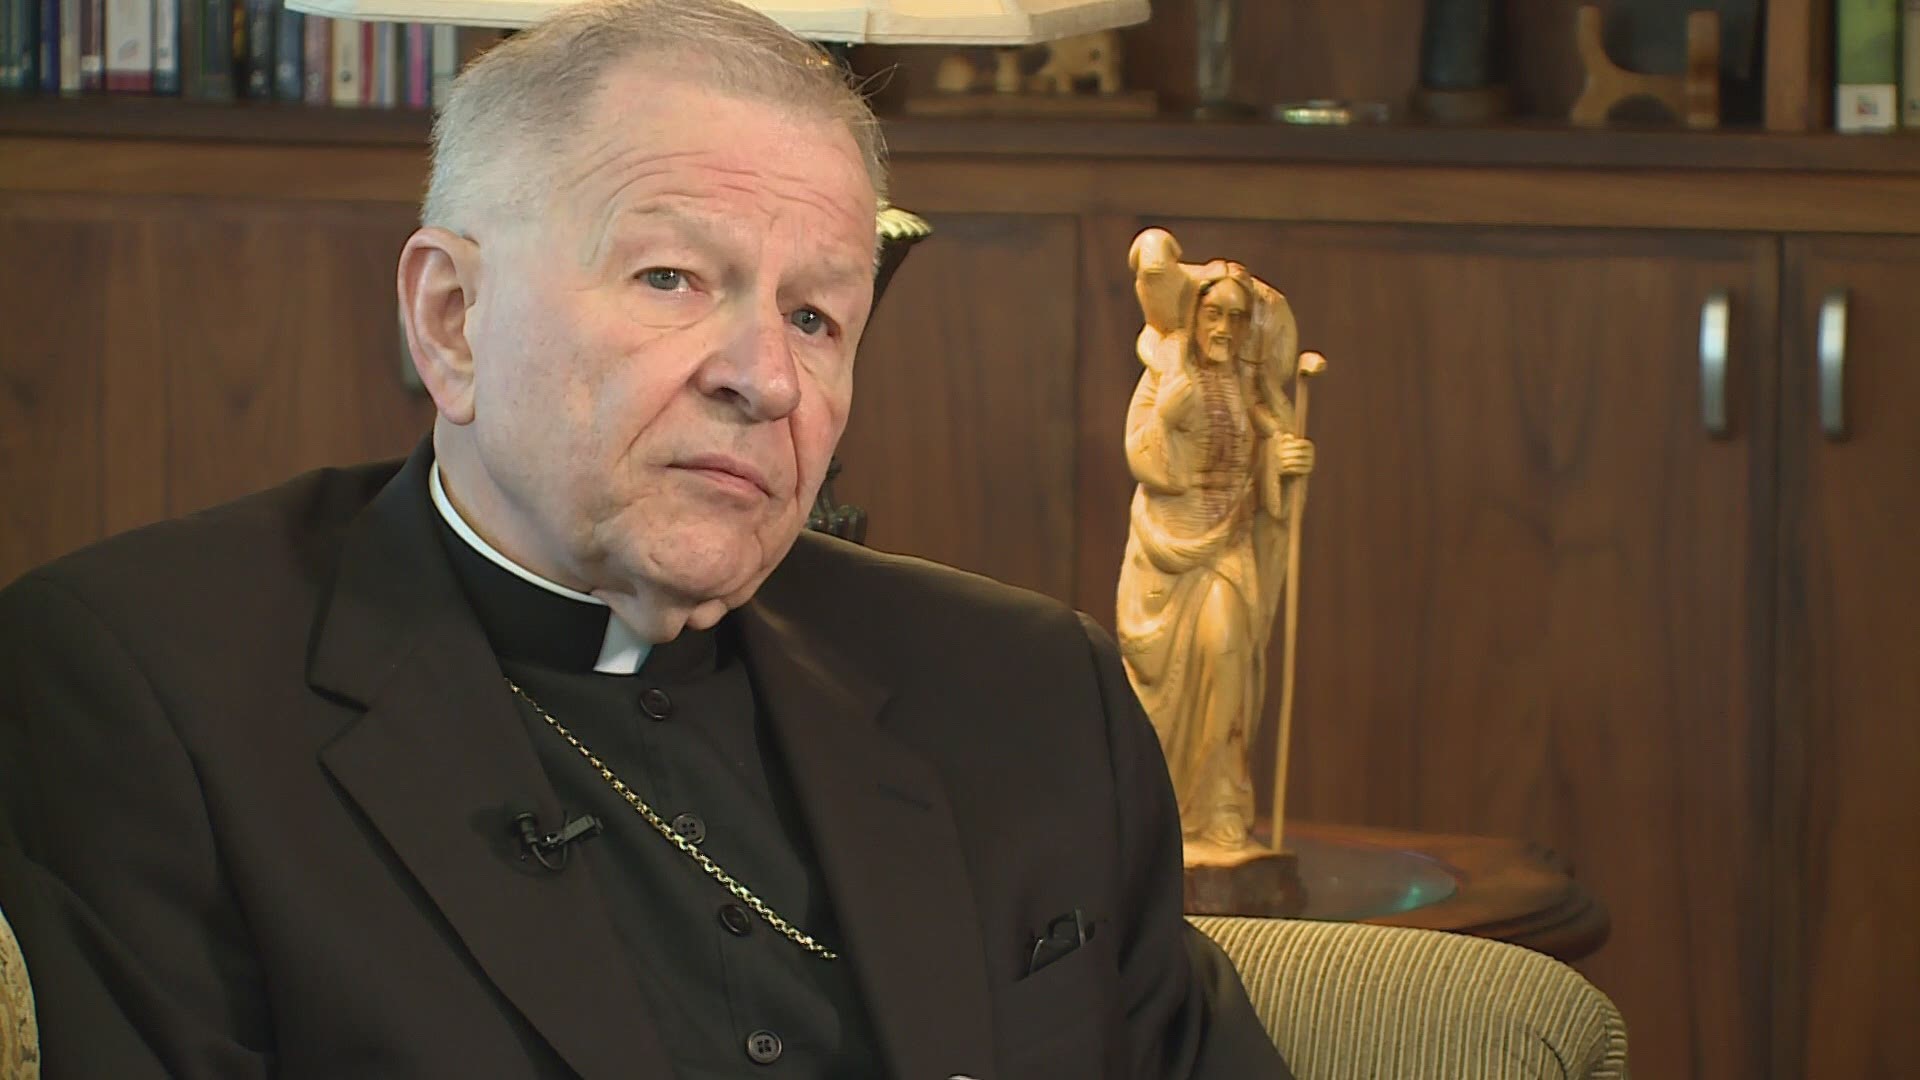 Archbishop Aymond says Catholics have struggled during the pandemic but have looked to what's important.